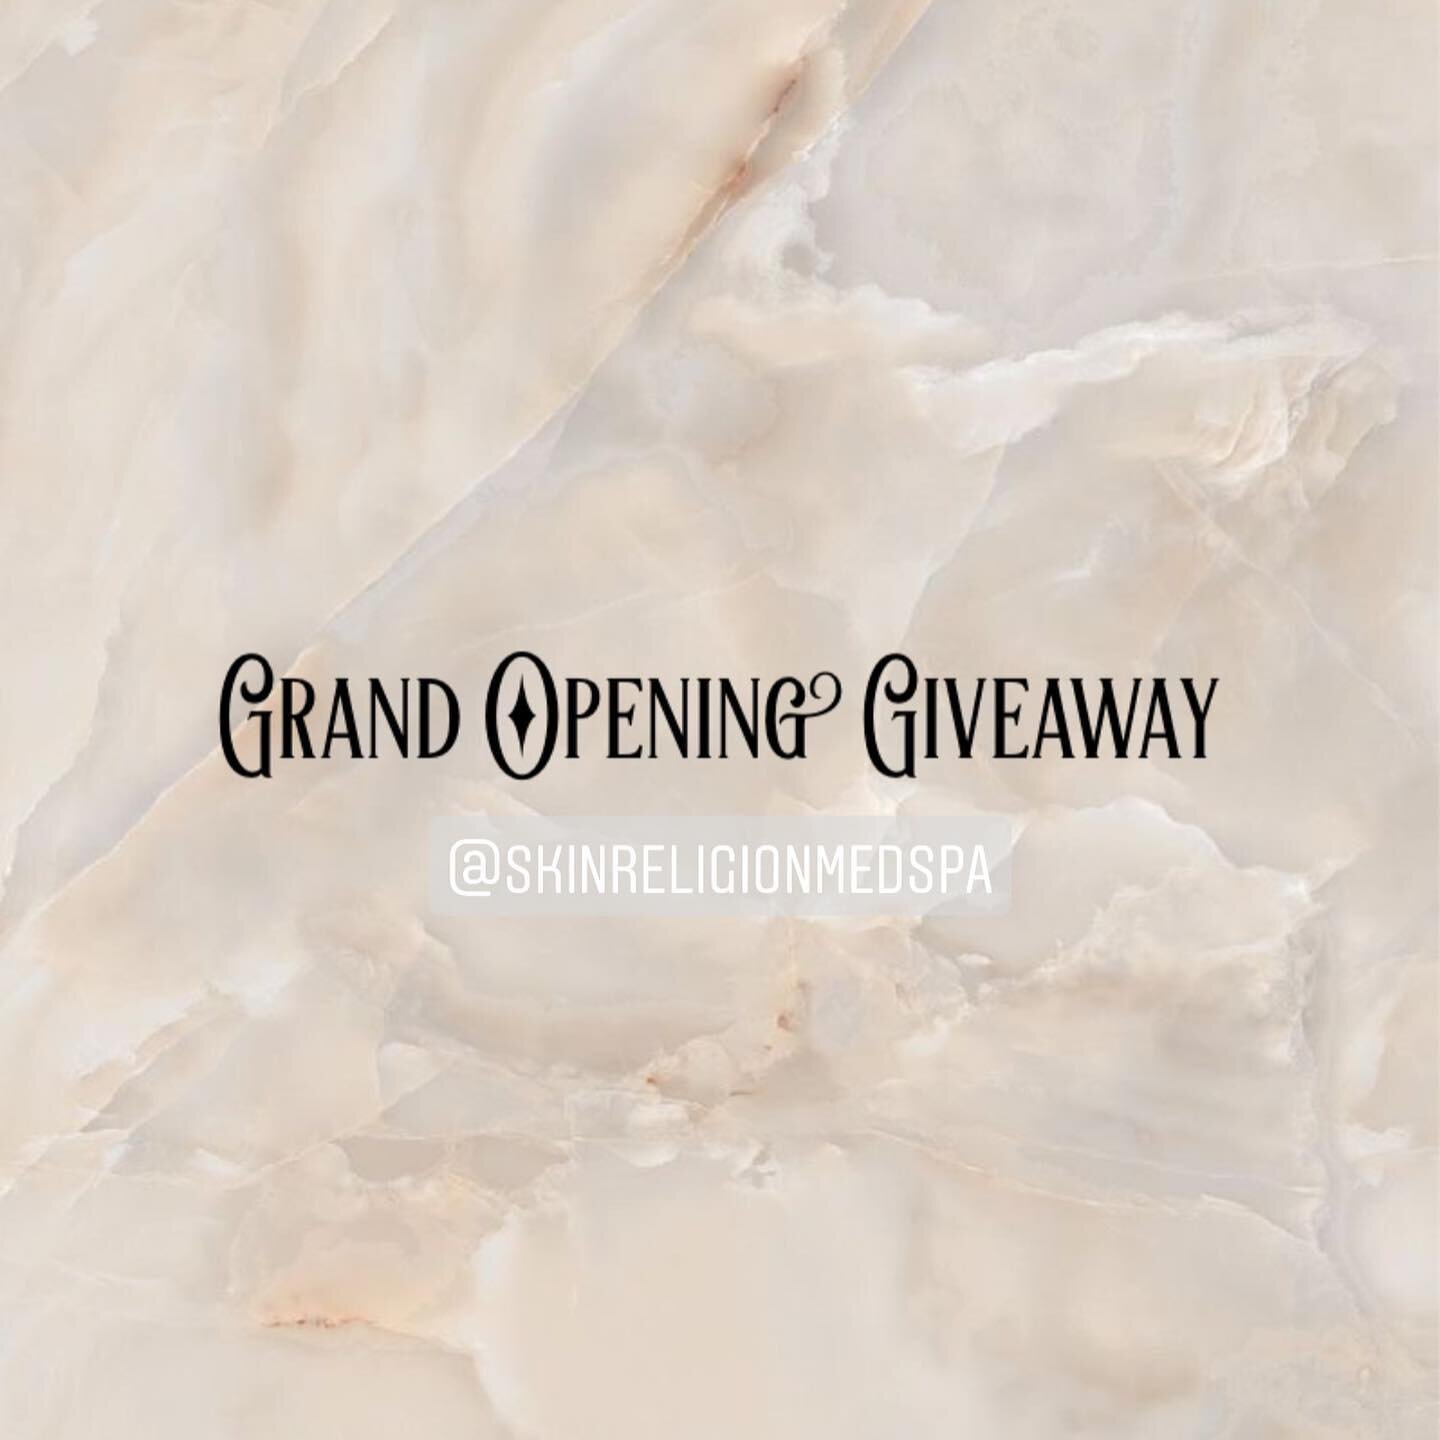 ✨SKIN RELIGION MEDICAL SPA &amp; WELLNESS GRAND OPENING GIVEAWAY✨

We will be choosing 5 lucky winners (1 prize per winner!)

🎁1st Prize: A super cute Prada handbag

🎁2nd Prize: A $500 value Skinceuticals skincare set

🎁3rd Prize: Russian lips (us